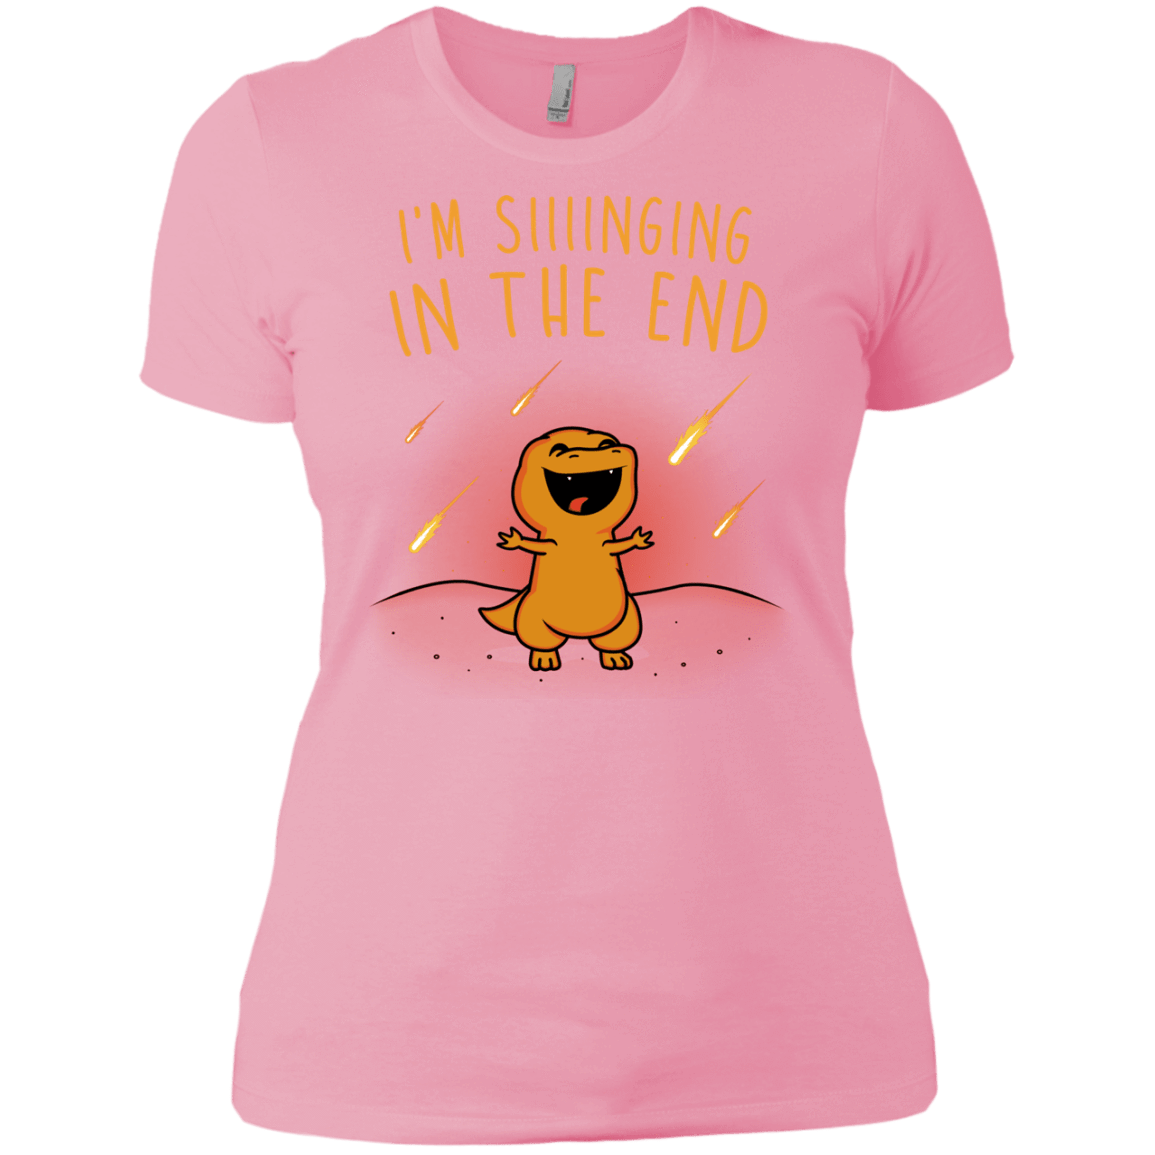 T-Shirts Light Pink / X-Small Singing in the End Women's Premium T-Shirt